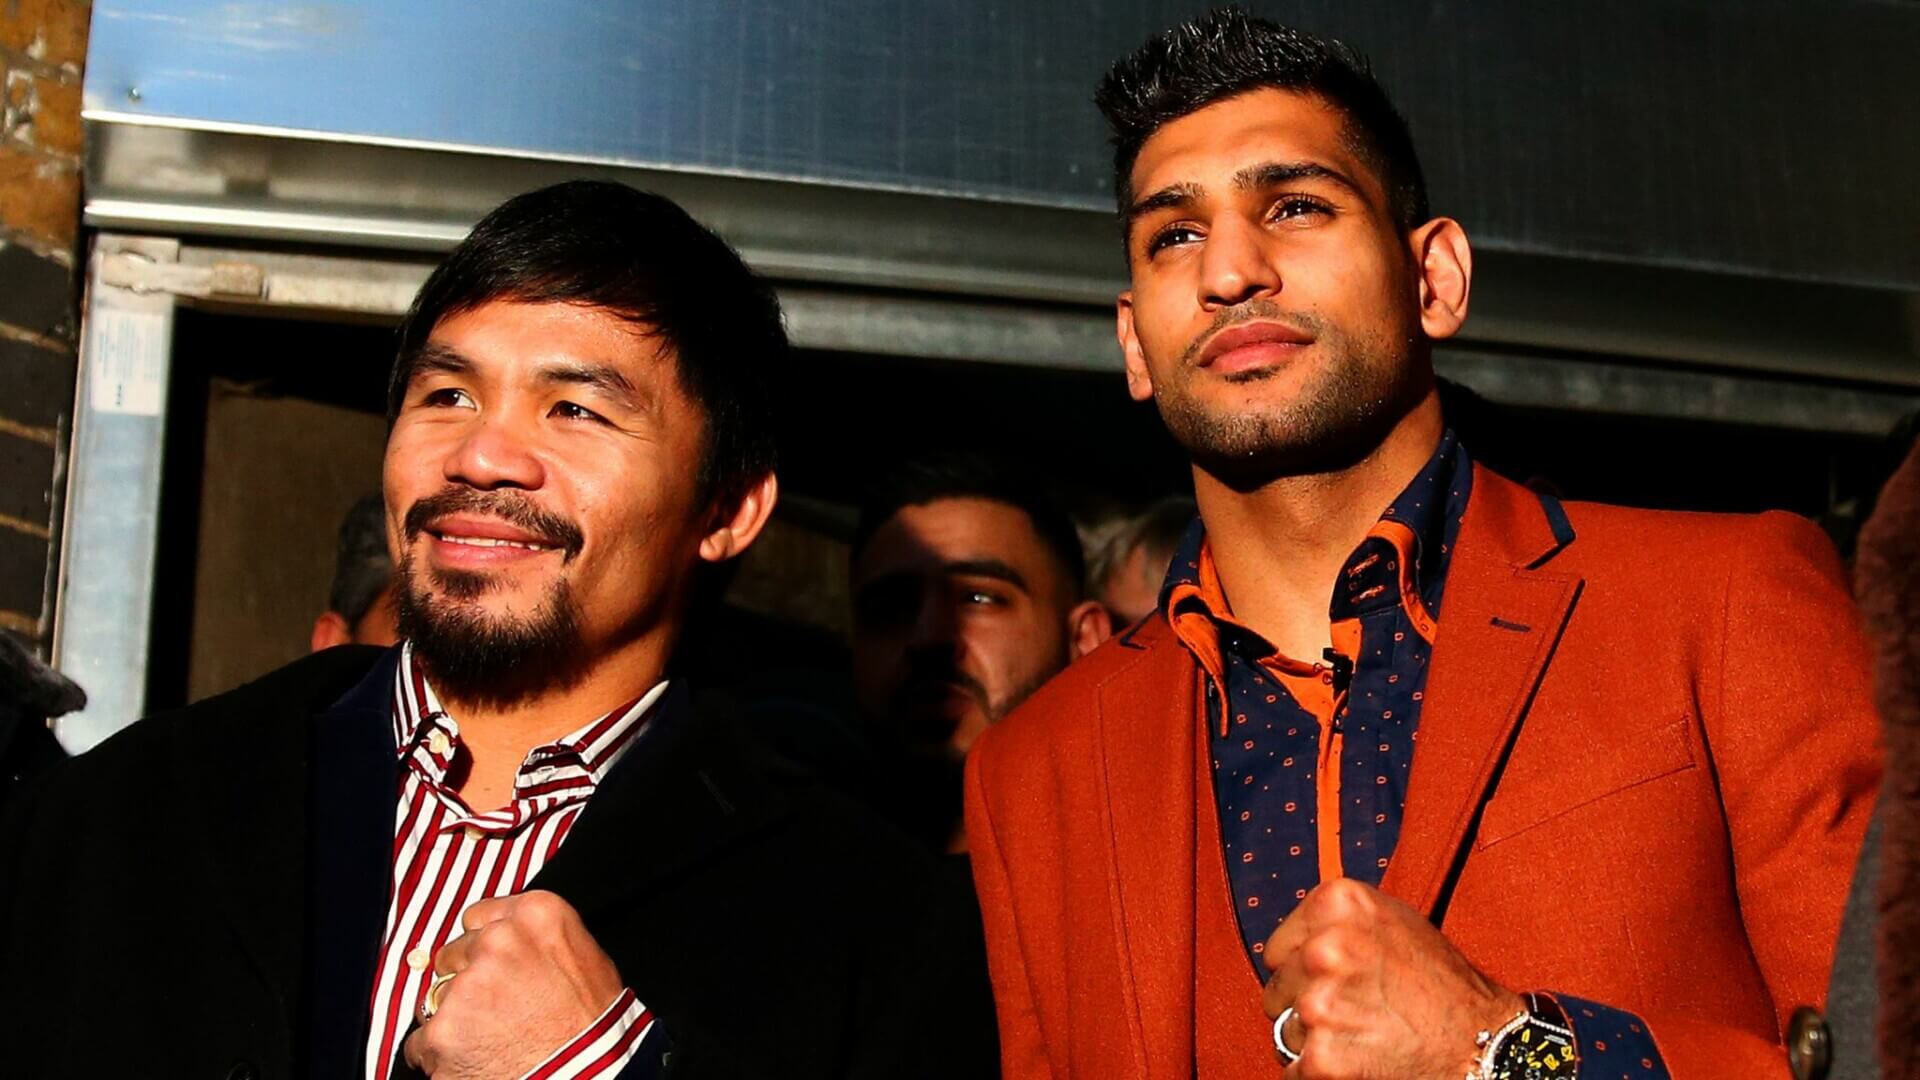 Amir Khan Still Wants The Manny Pacquiao Fight - 'It Would Be A Brilliant Fight'